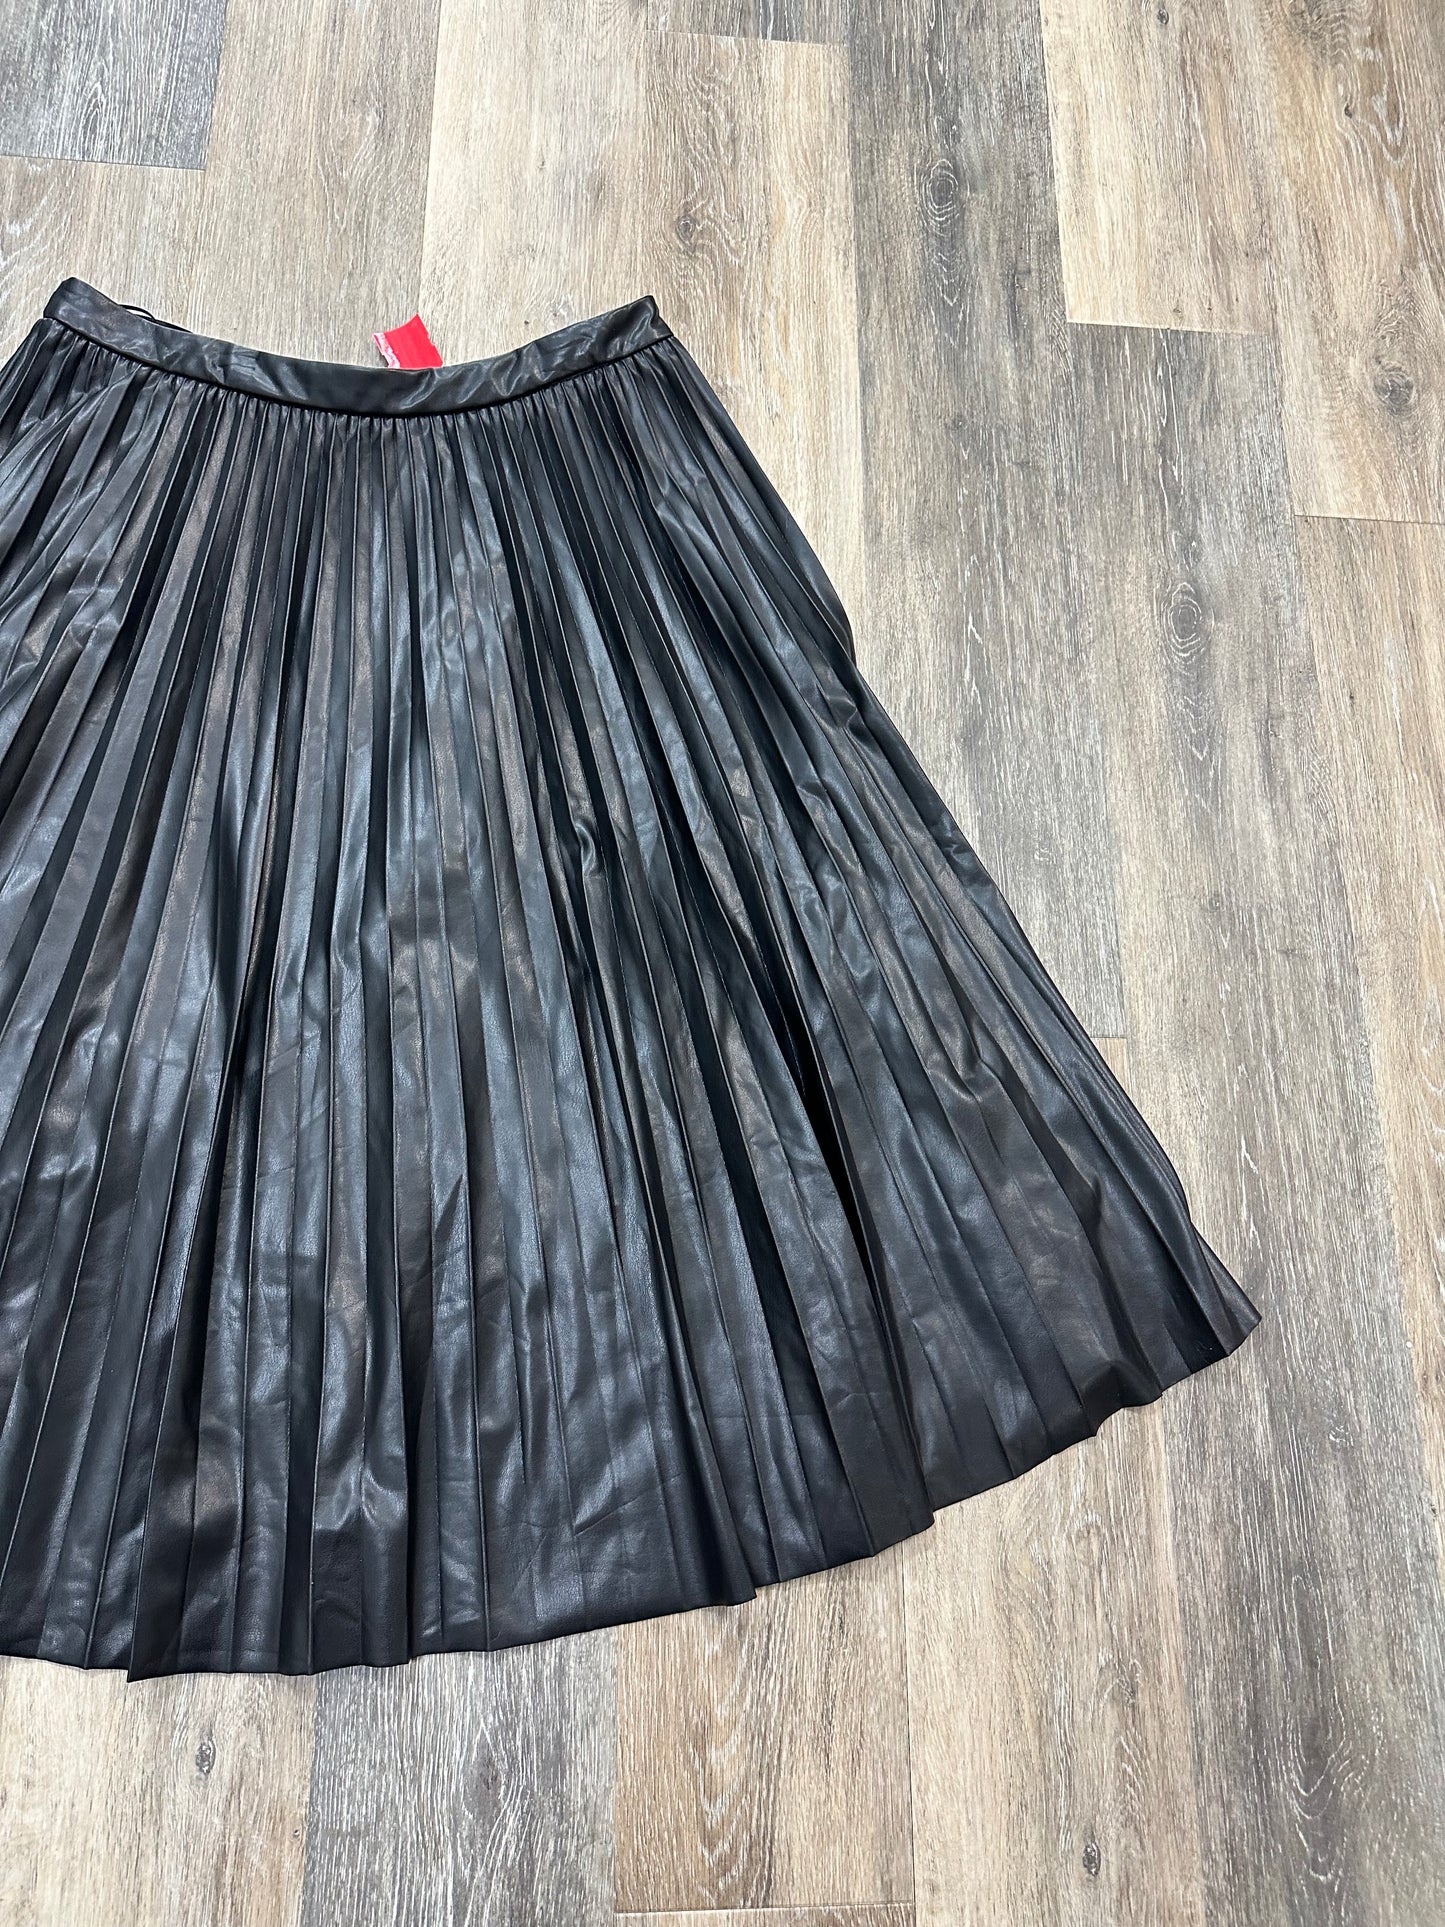 Skirt Midi By See N Be Seen  Size: 1x